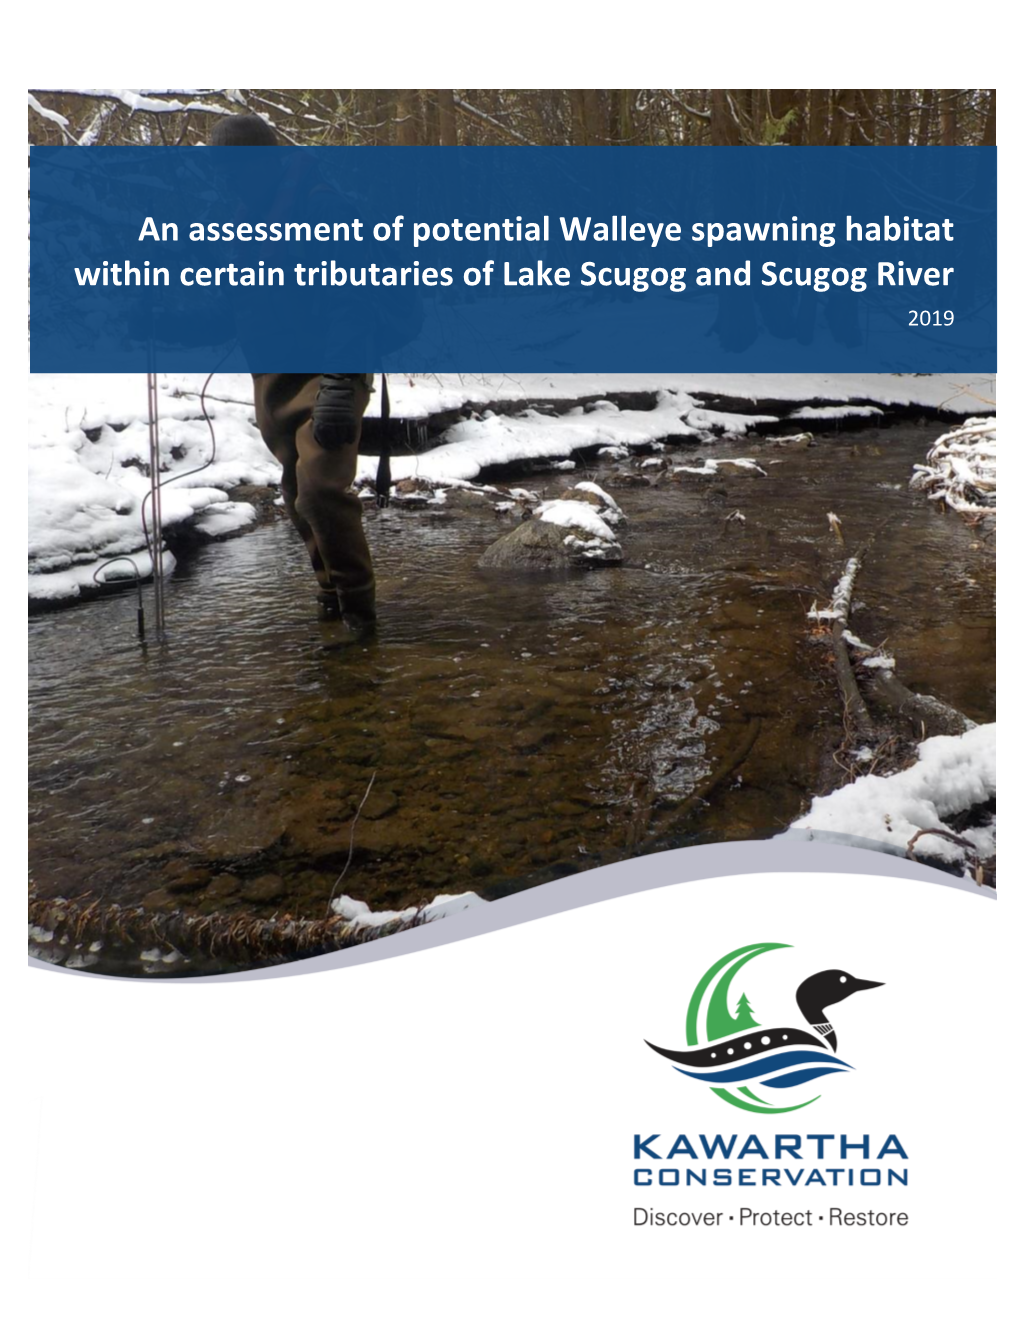 An Assessment of Potential Walleye Spawning Habitat Within Certain Tributaries of Lake Scugog and Scugog River 2019